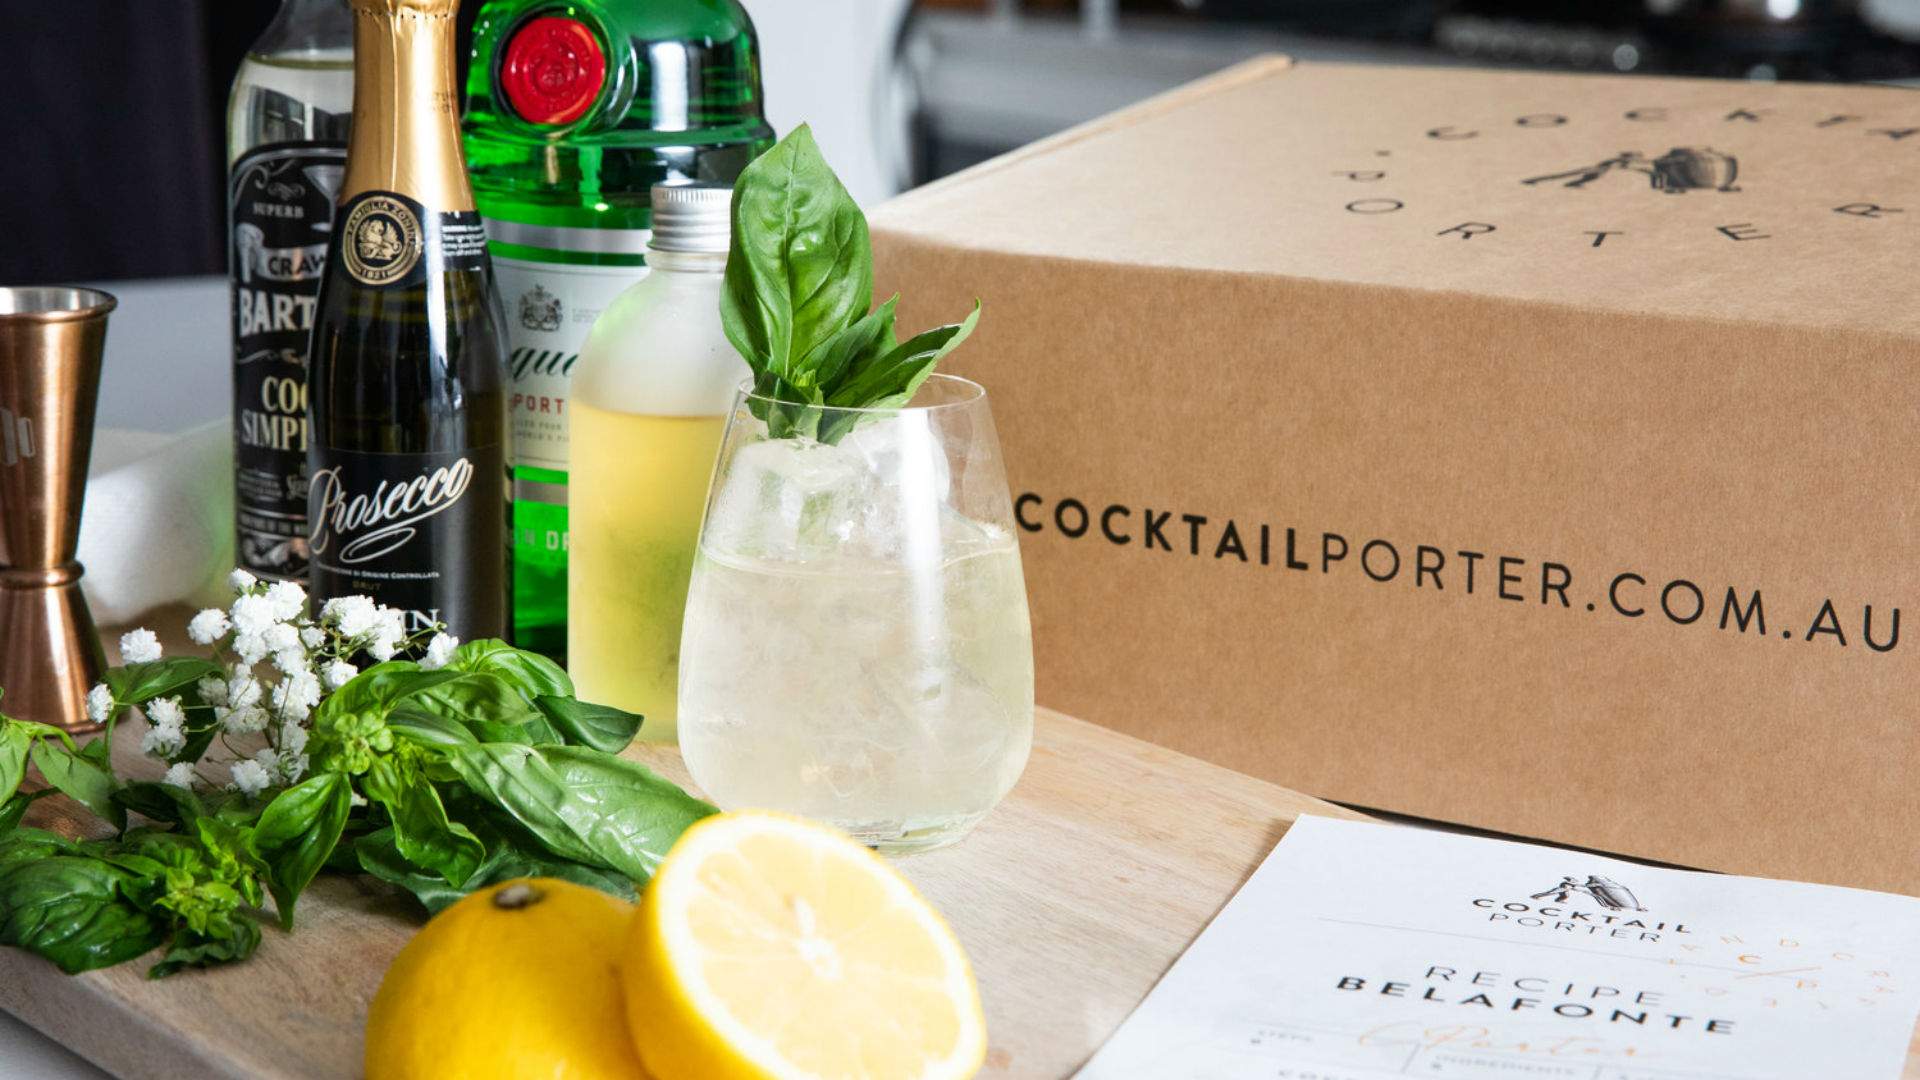 This New Australian Drinks Service Delivers a Heap of Cocktails to Your Door Each Month